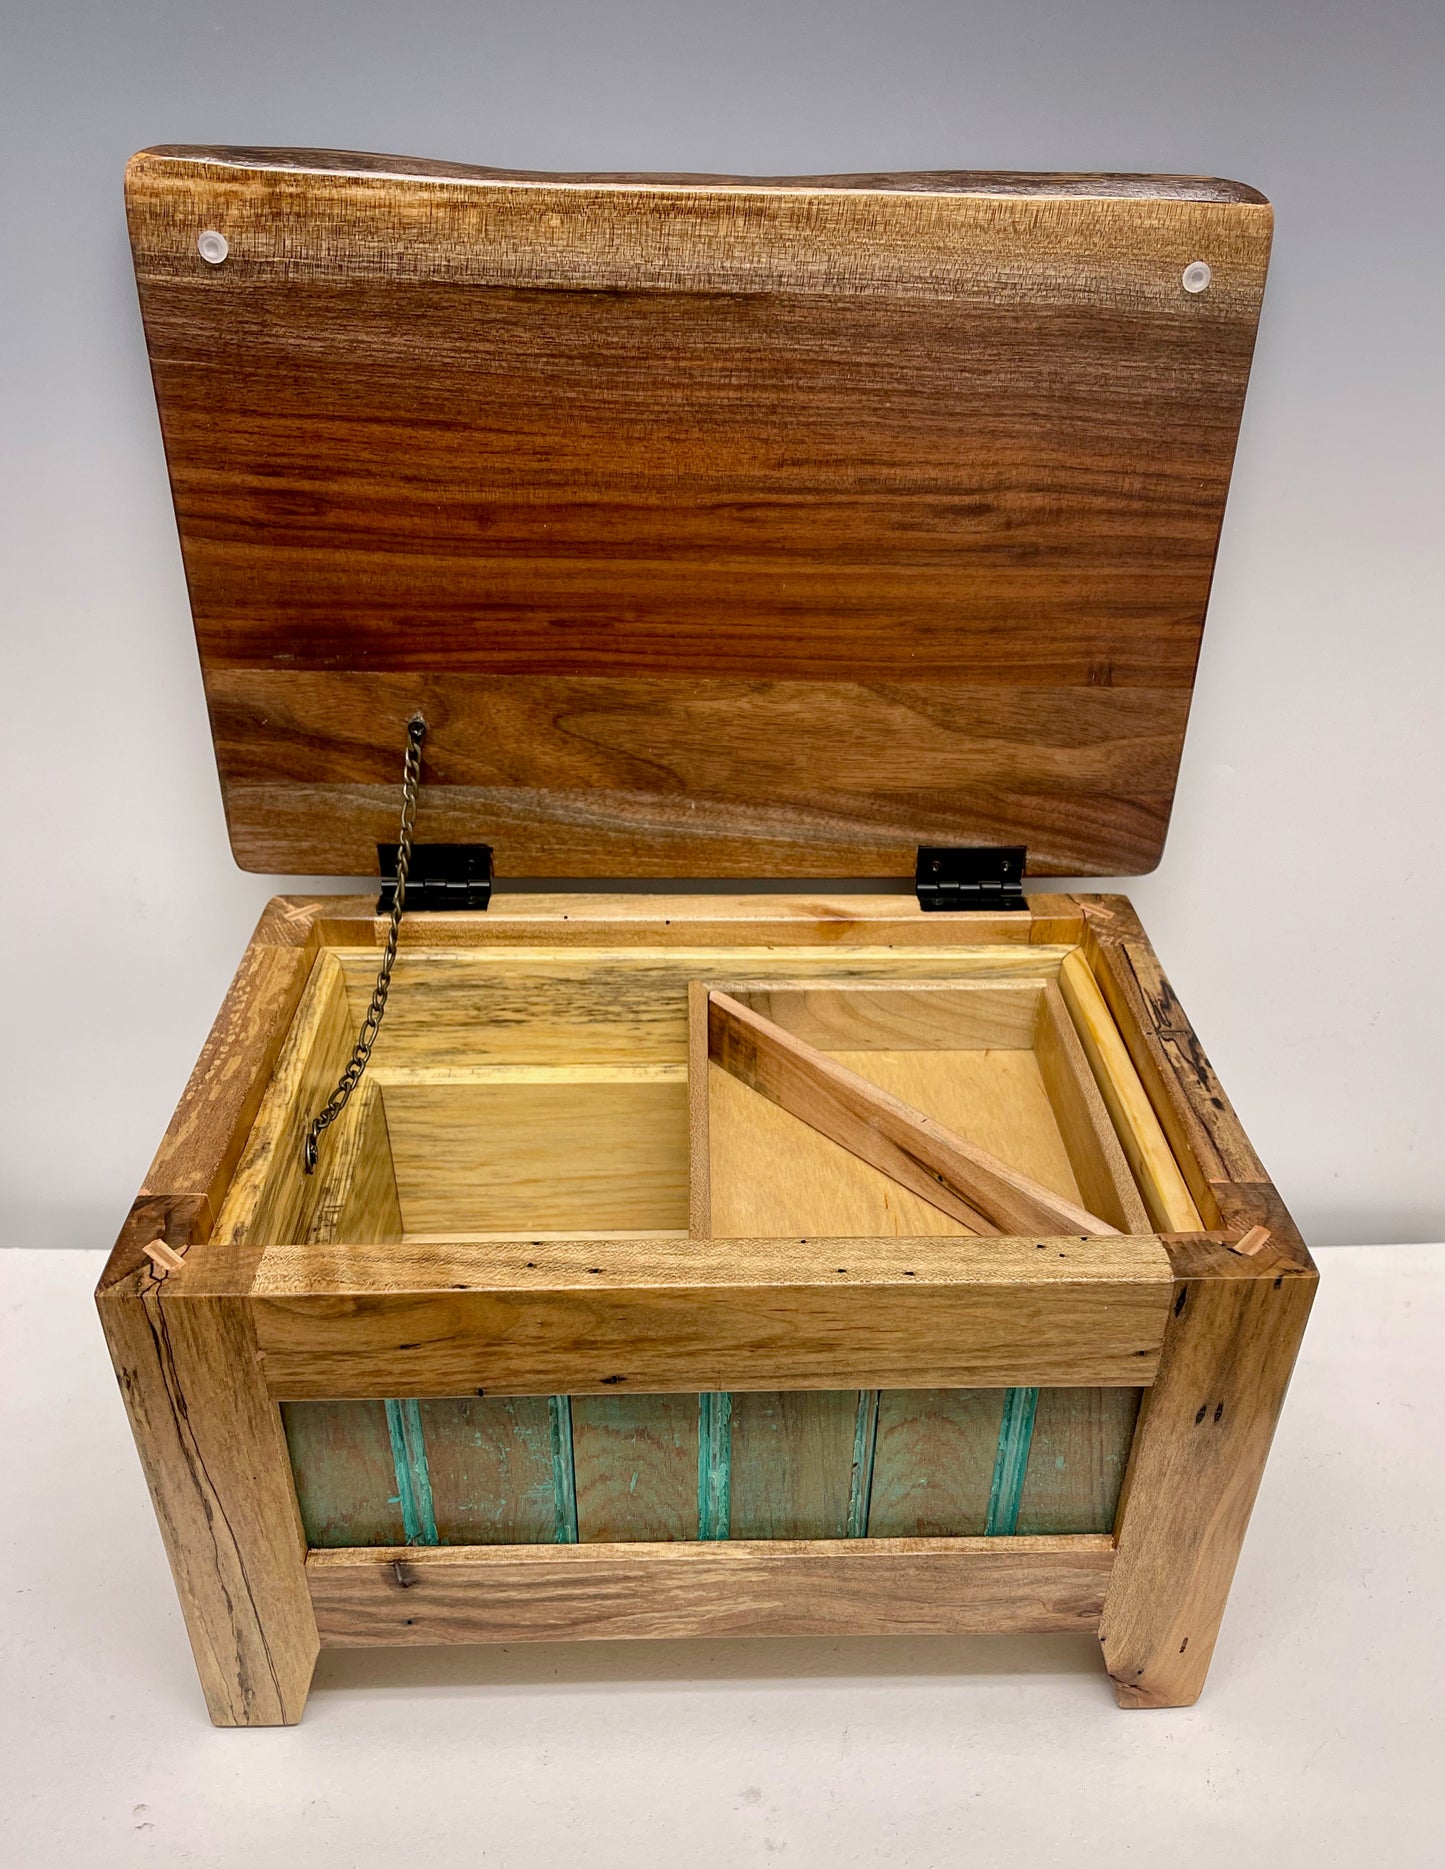 Walnut, Spalted Maple and Recycled Bead Board Treasure Chest